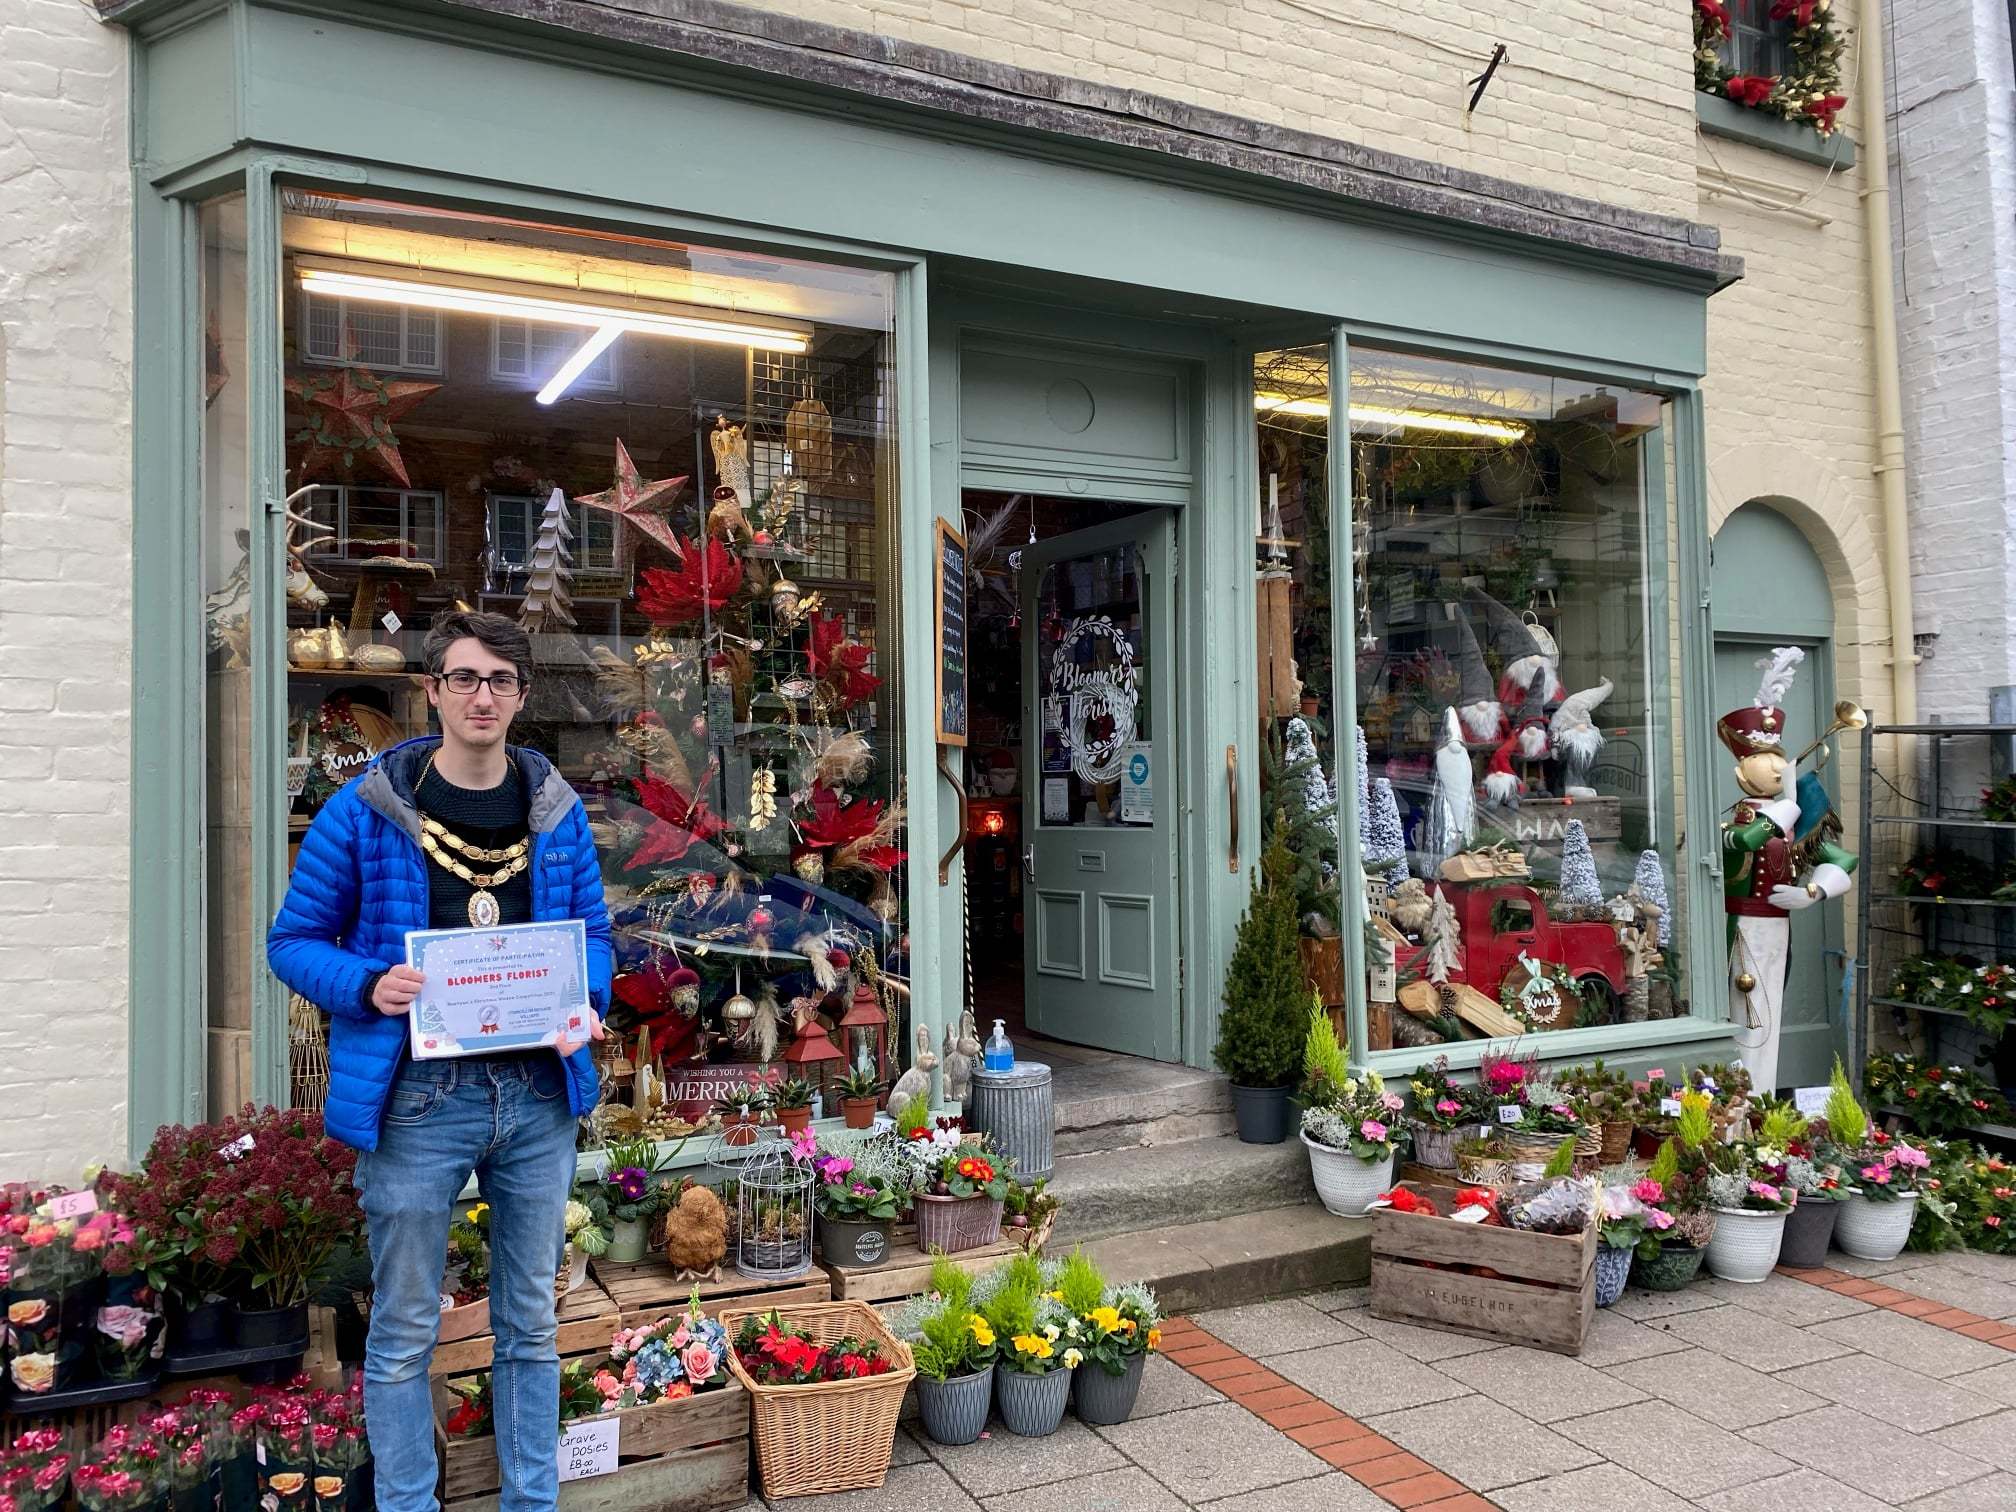 Bloomers Florist won second place in the Newtown Christmas Window Display competition 2021